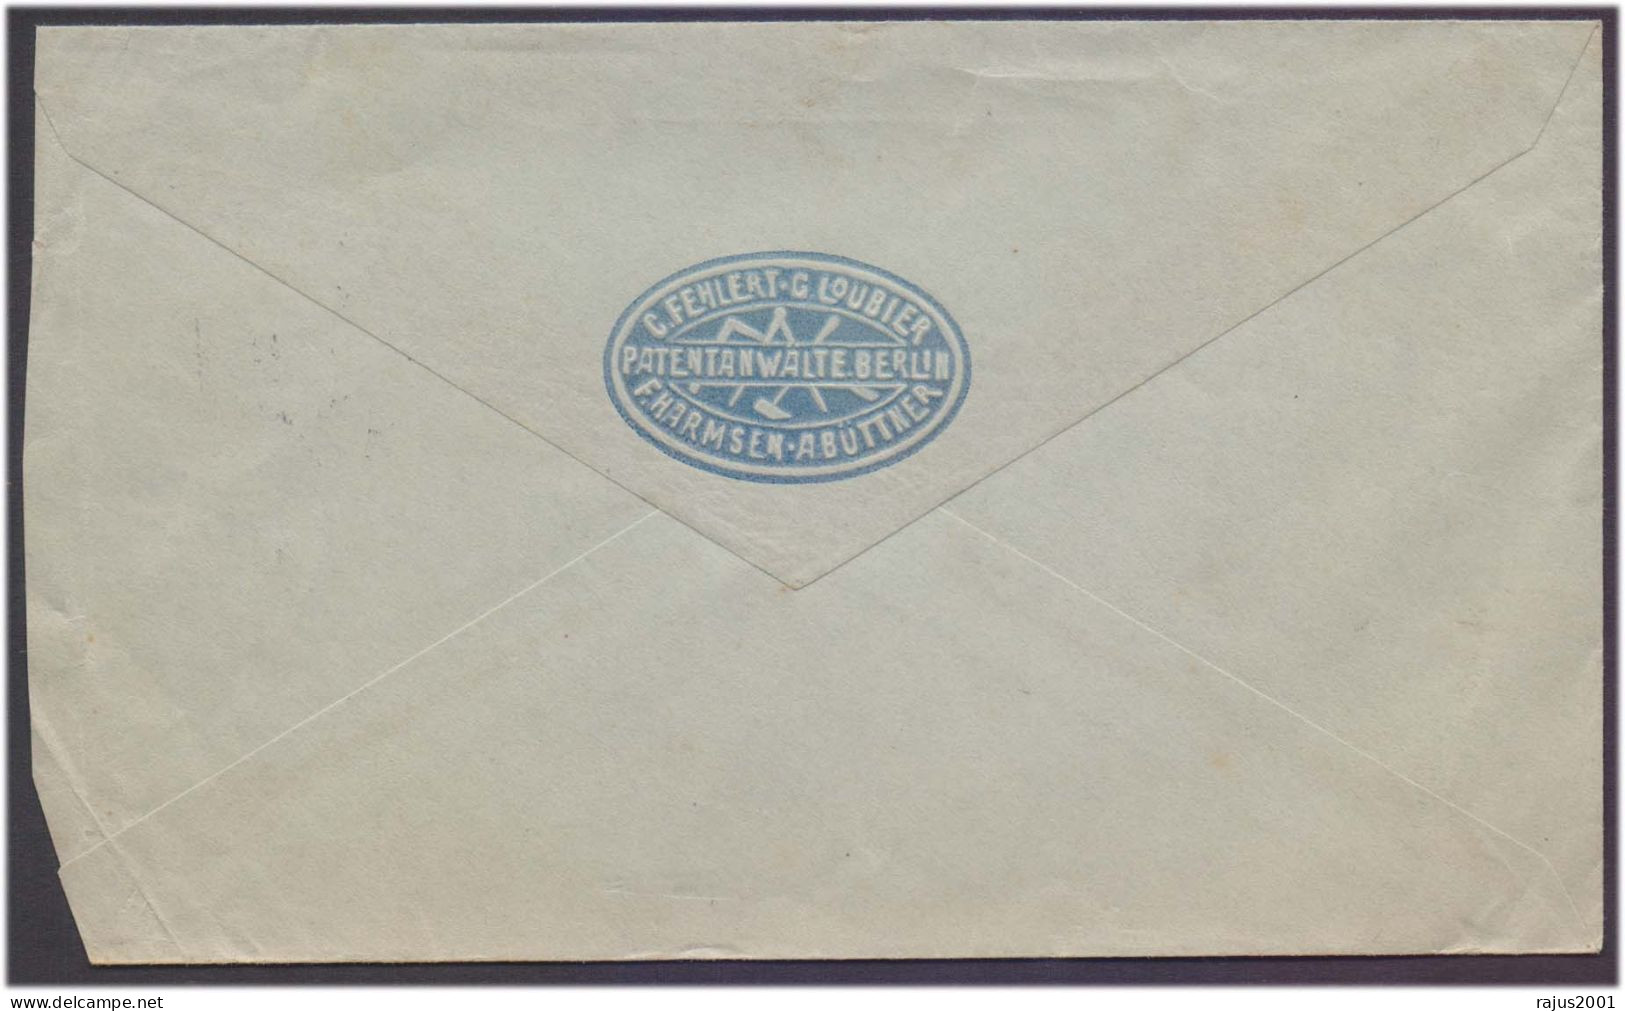 Deutsches Reich Berlin 1906, Received Cyrus Kehr  Germany Postal Stationery Cover - Enveloppes